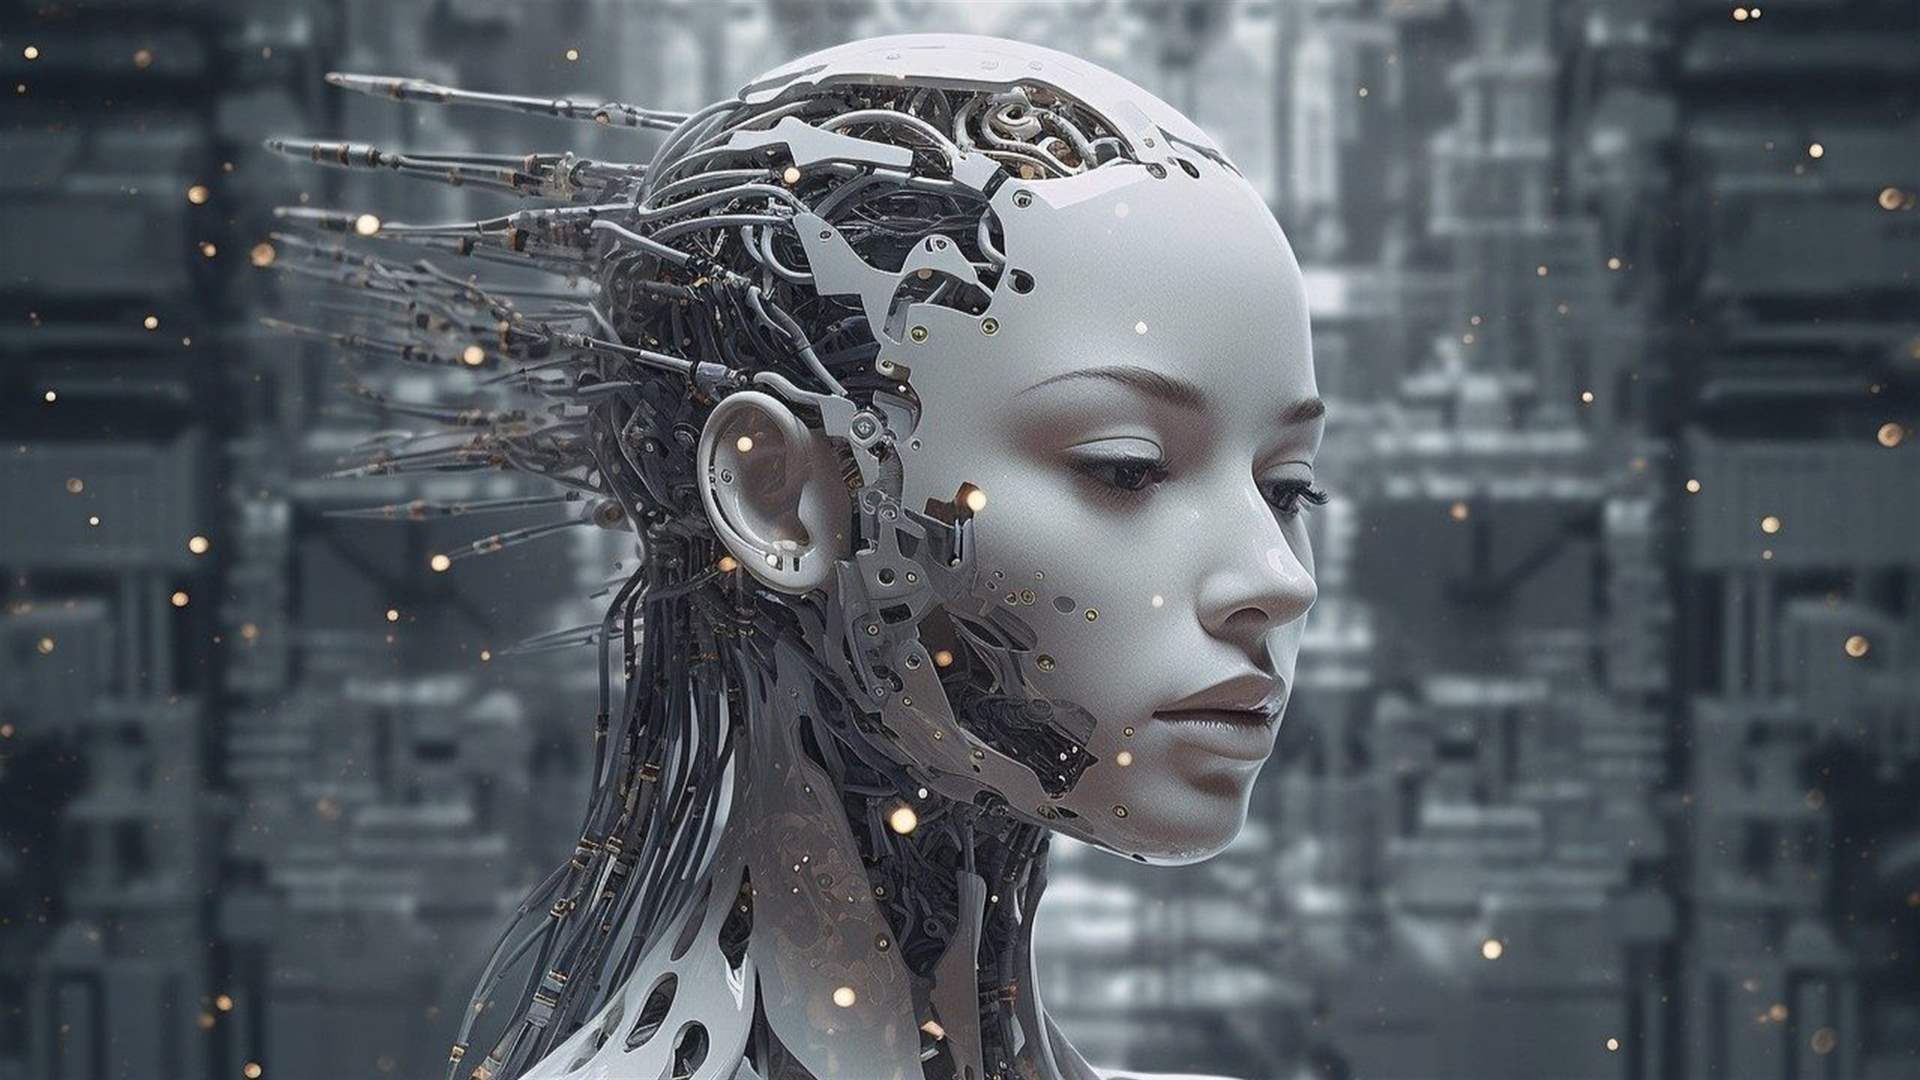 Will AI really destroy humanity?